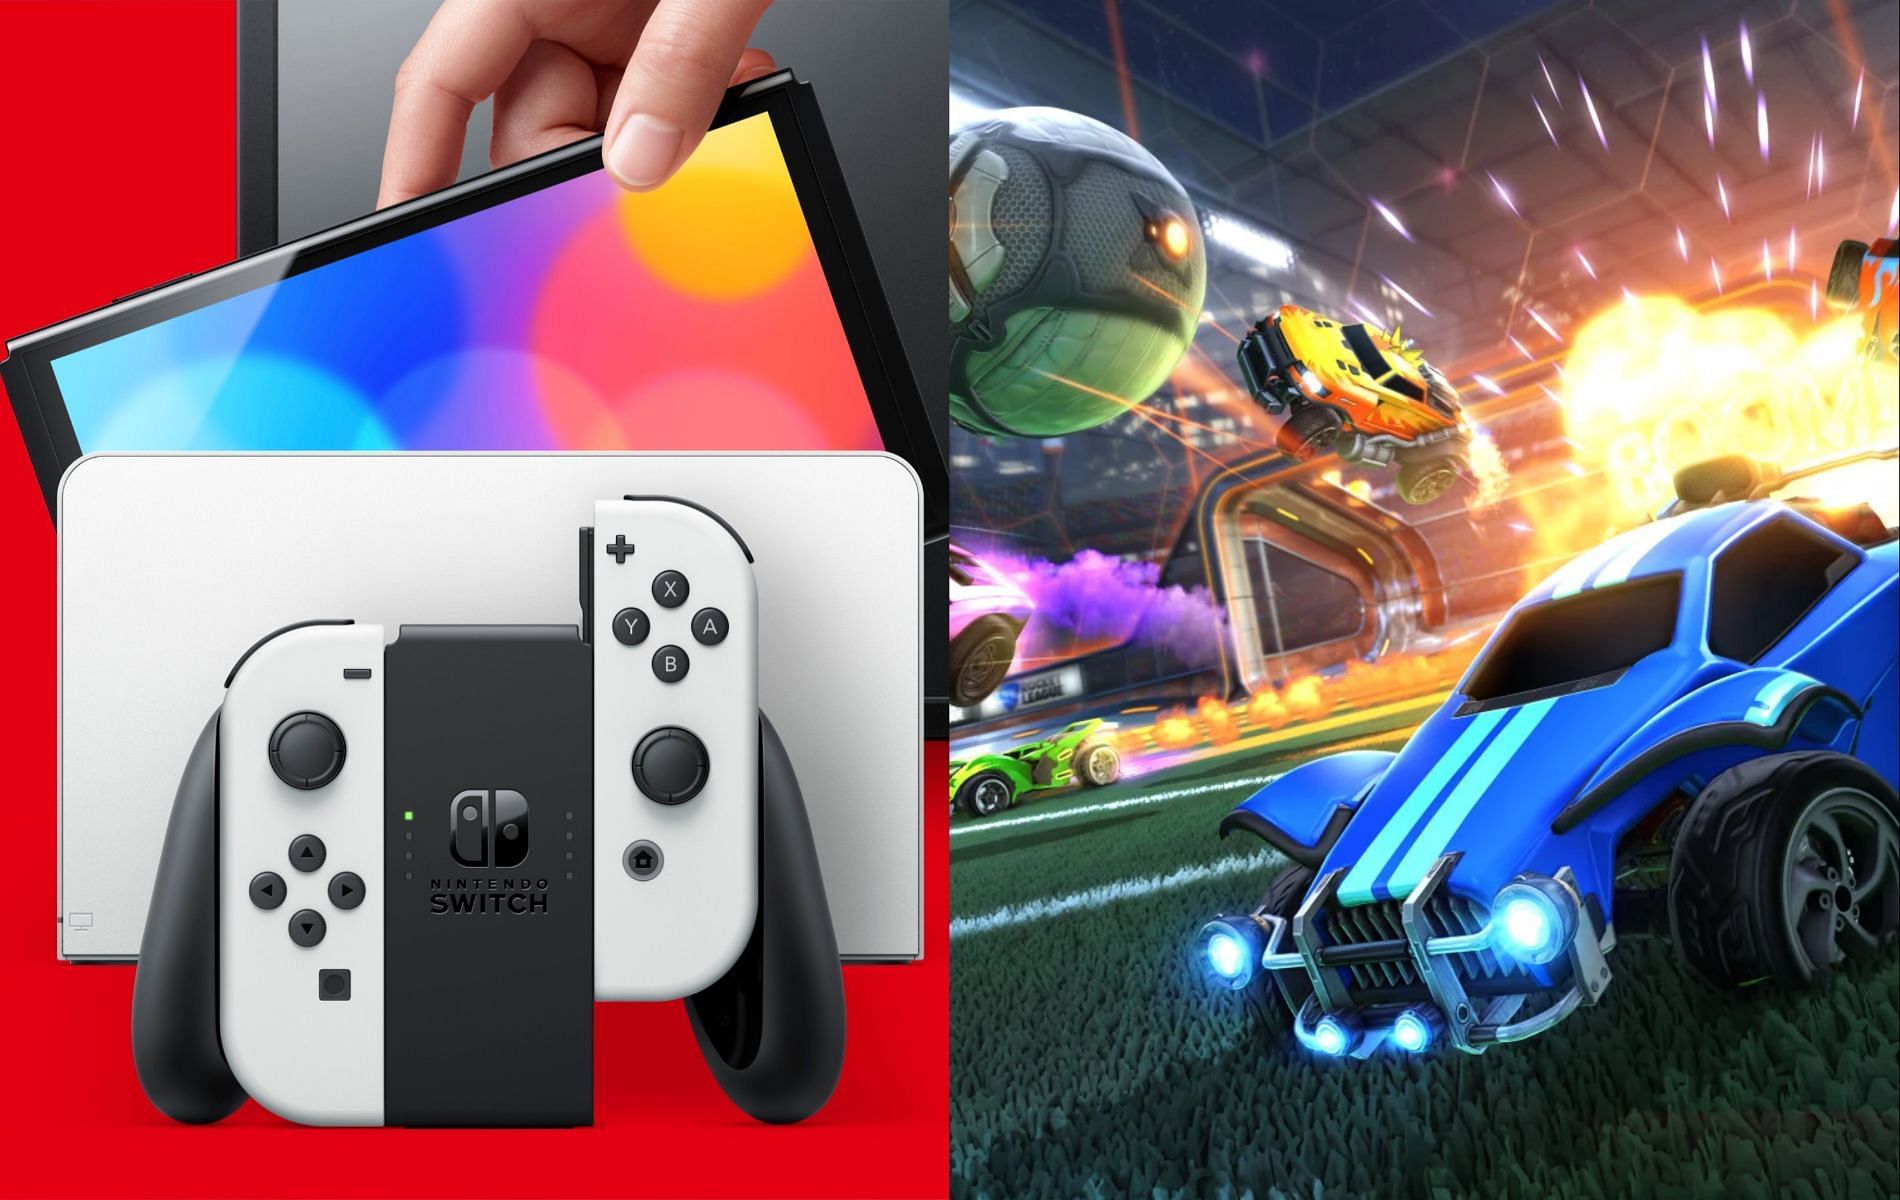 There are a decent number of competitive games to check out on the acclaimed handheld platform (Images via Nintendo/Epic Games)